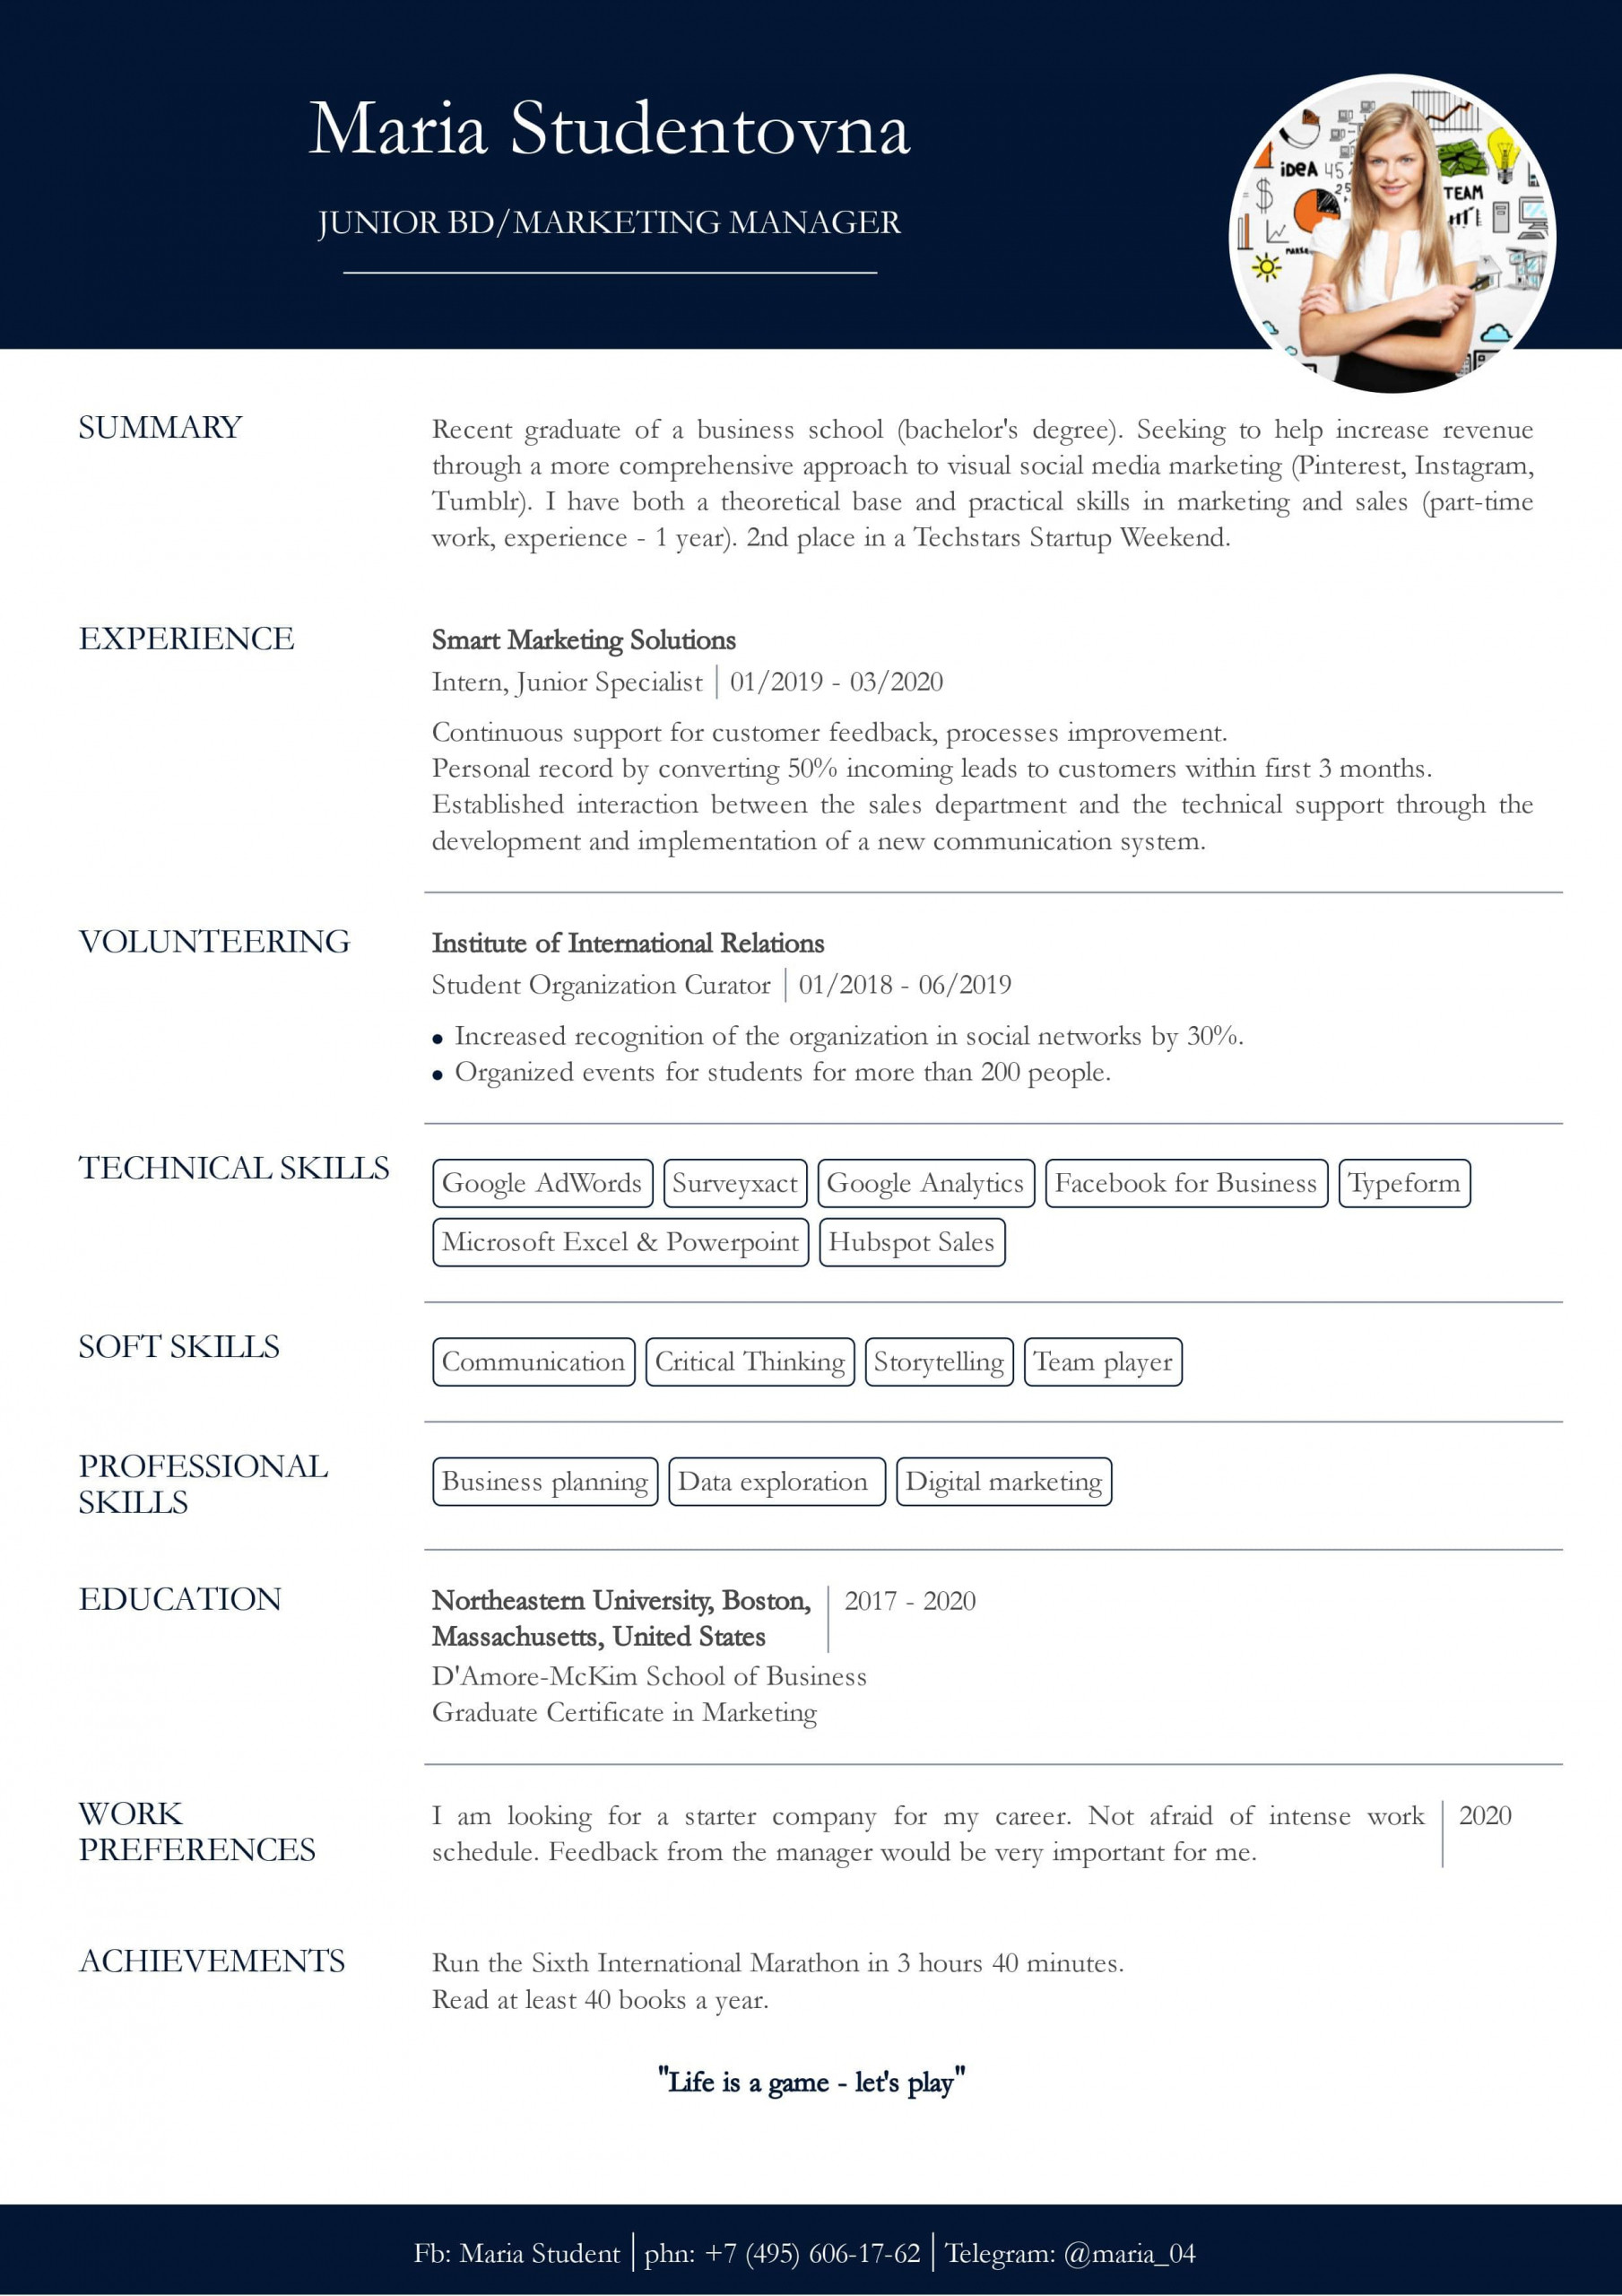 Sample Of Resume with Temporary Jobs Resume with No Work Experience. Sample for Students. – Cv2you Blog